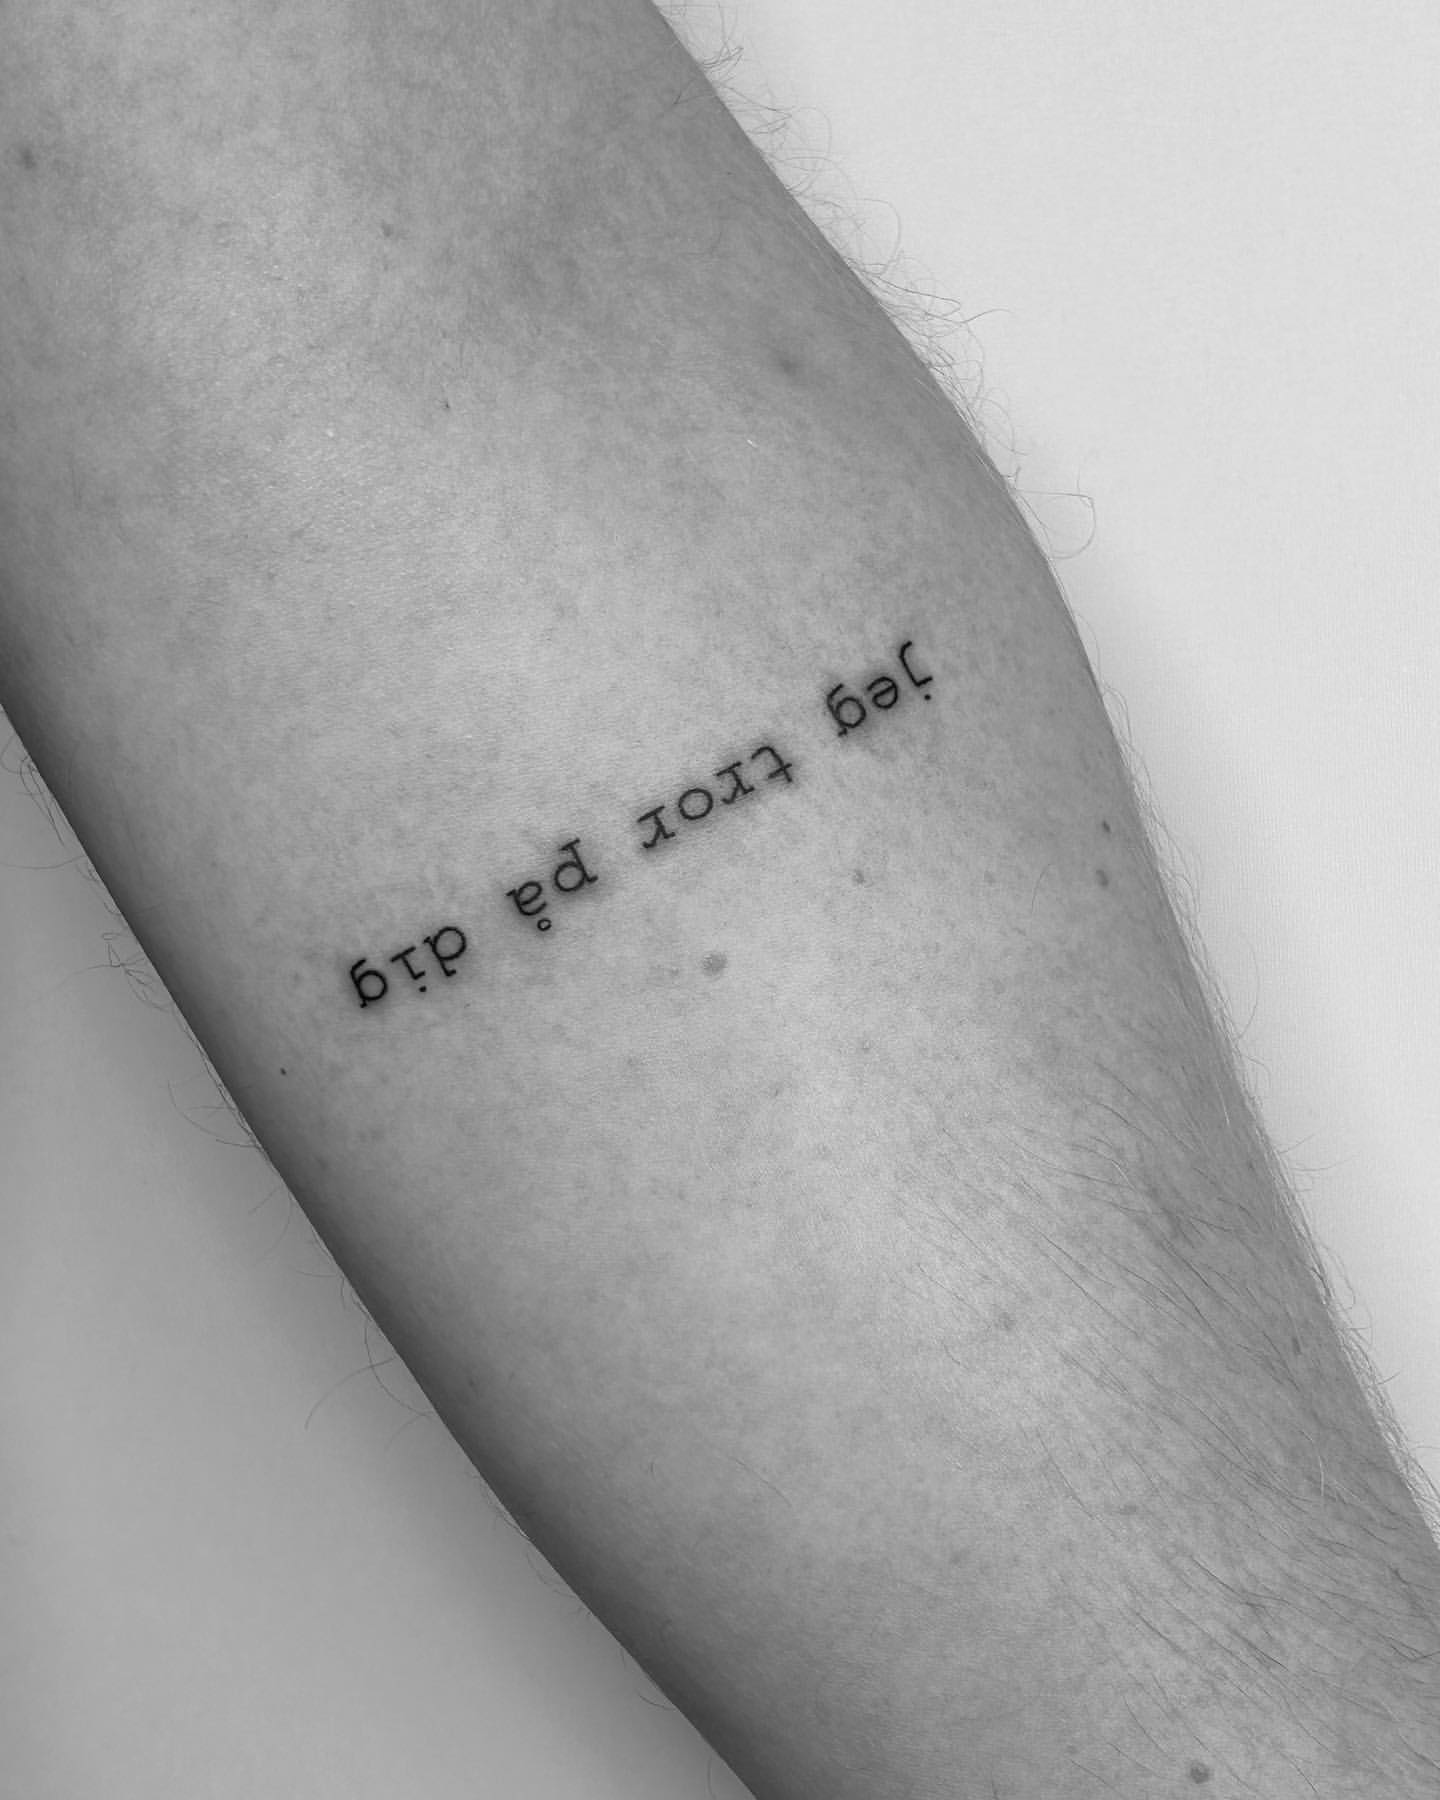 40 Forearm Quote Tattoos For Men ... | Tattoo quotes for men, Tattoo quotes,  Family quotes tattoos